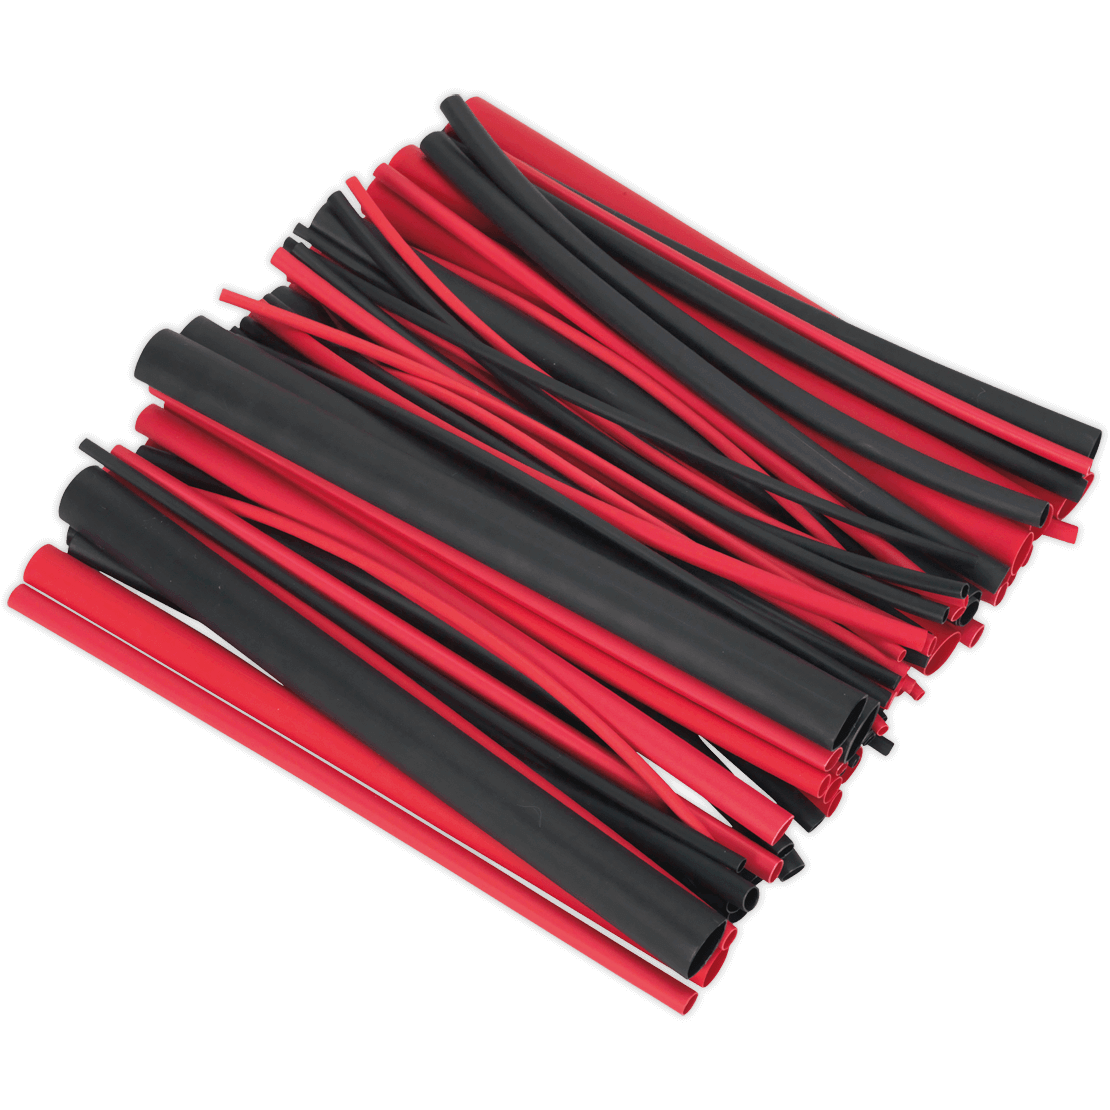 Sealey 72 Piece Adhesive Lined Heat Shrink Tubing Assortment Black / Red